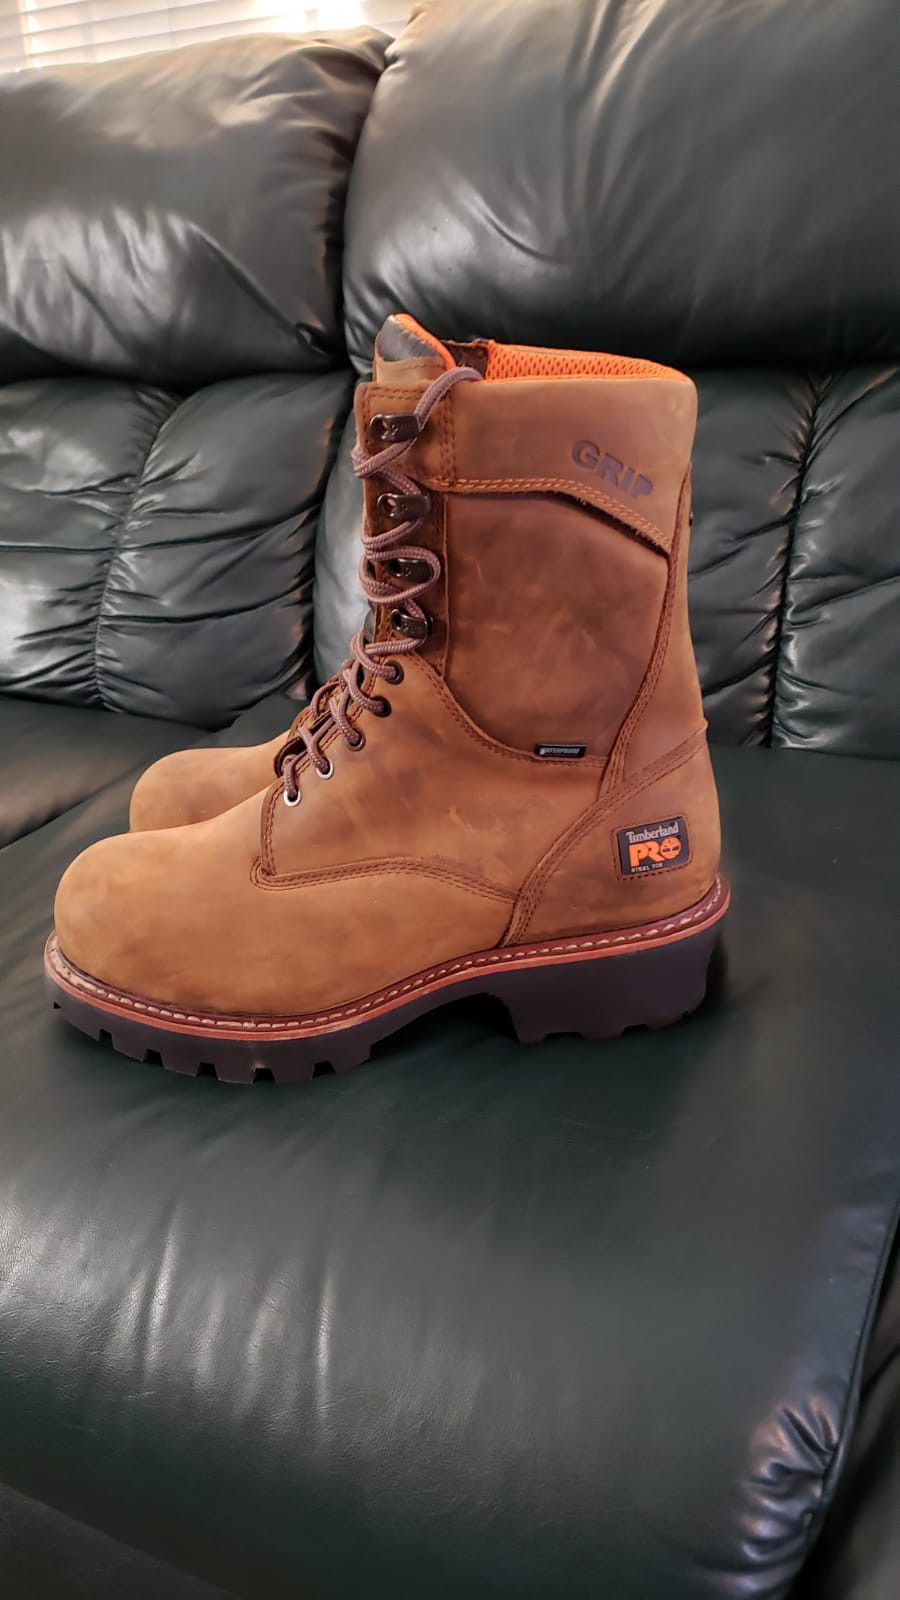 Timberland pro steel toe work boots size 10.5